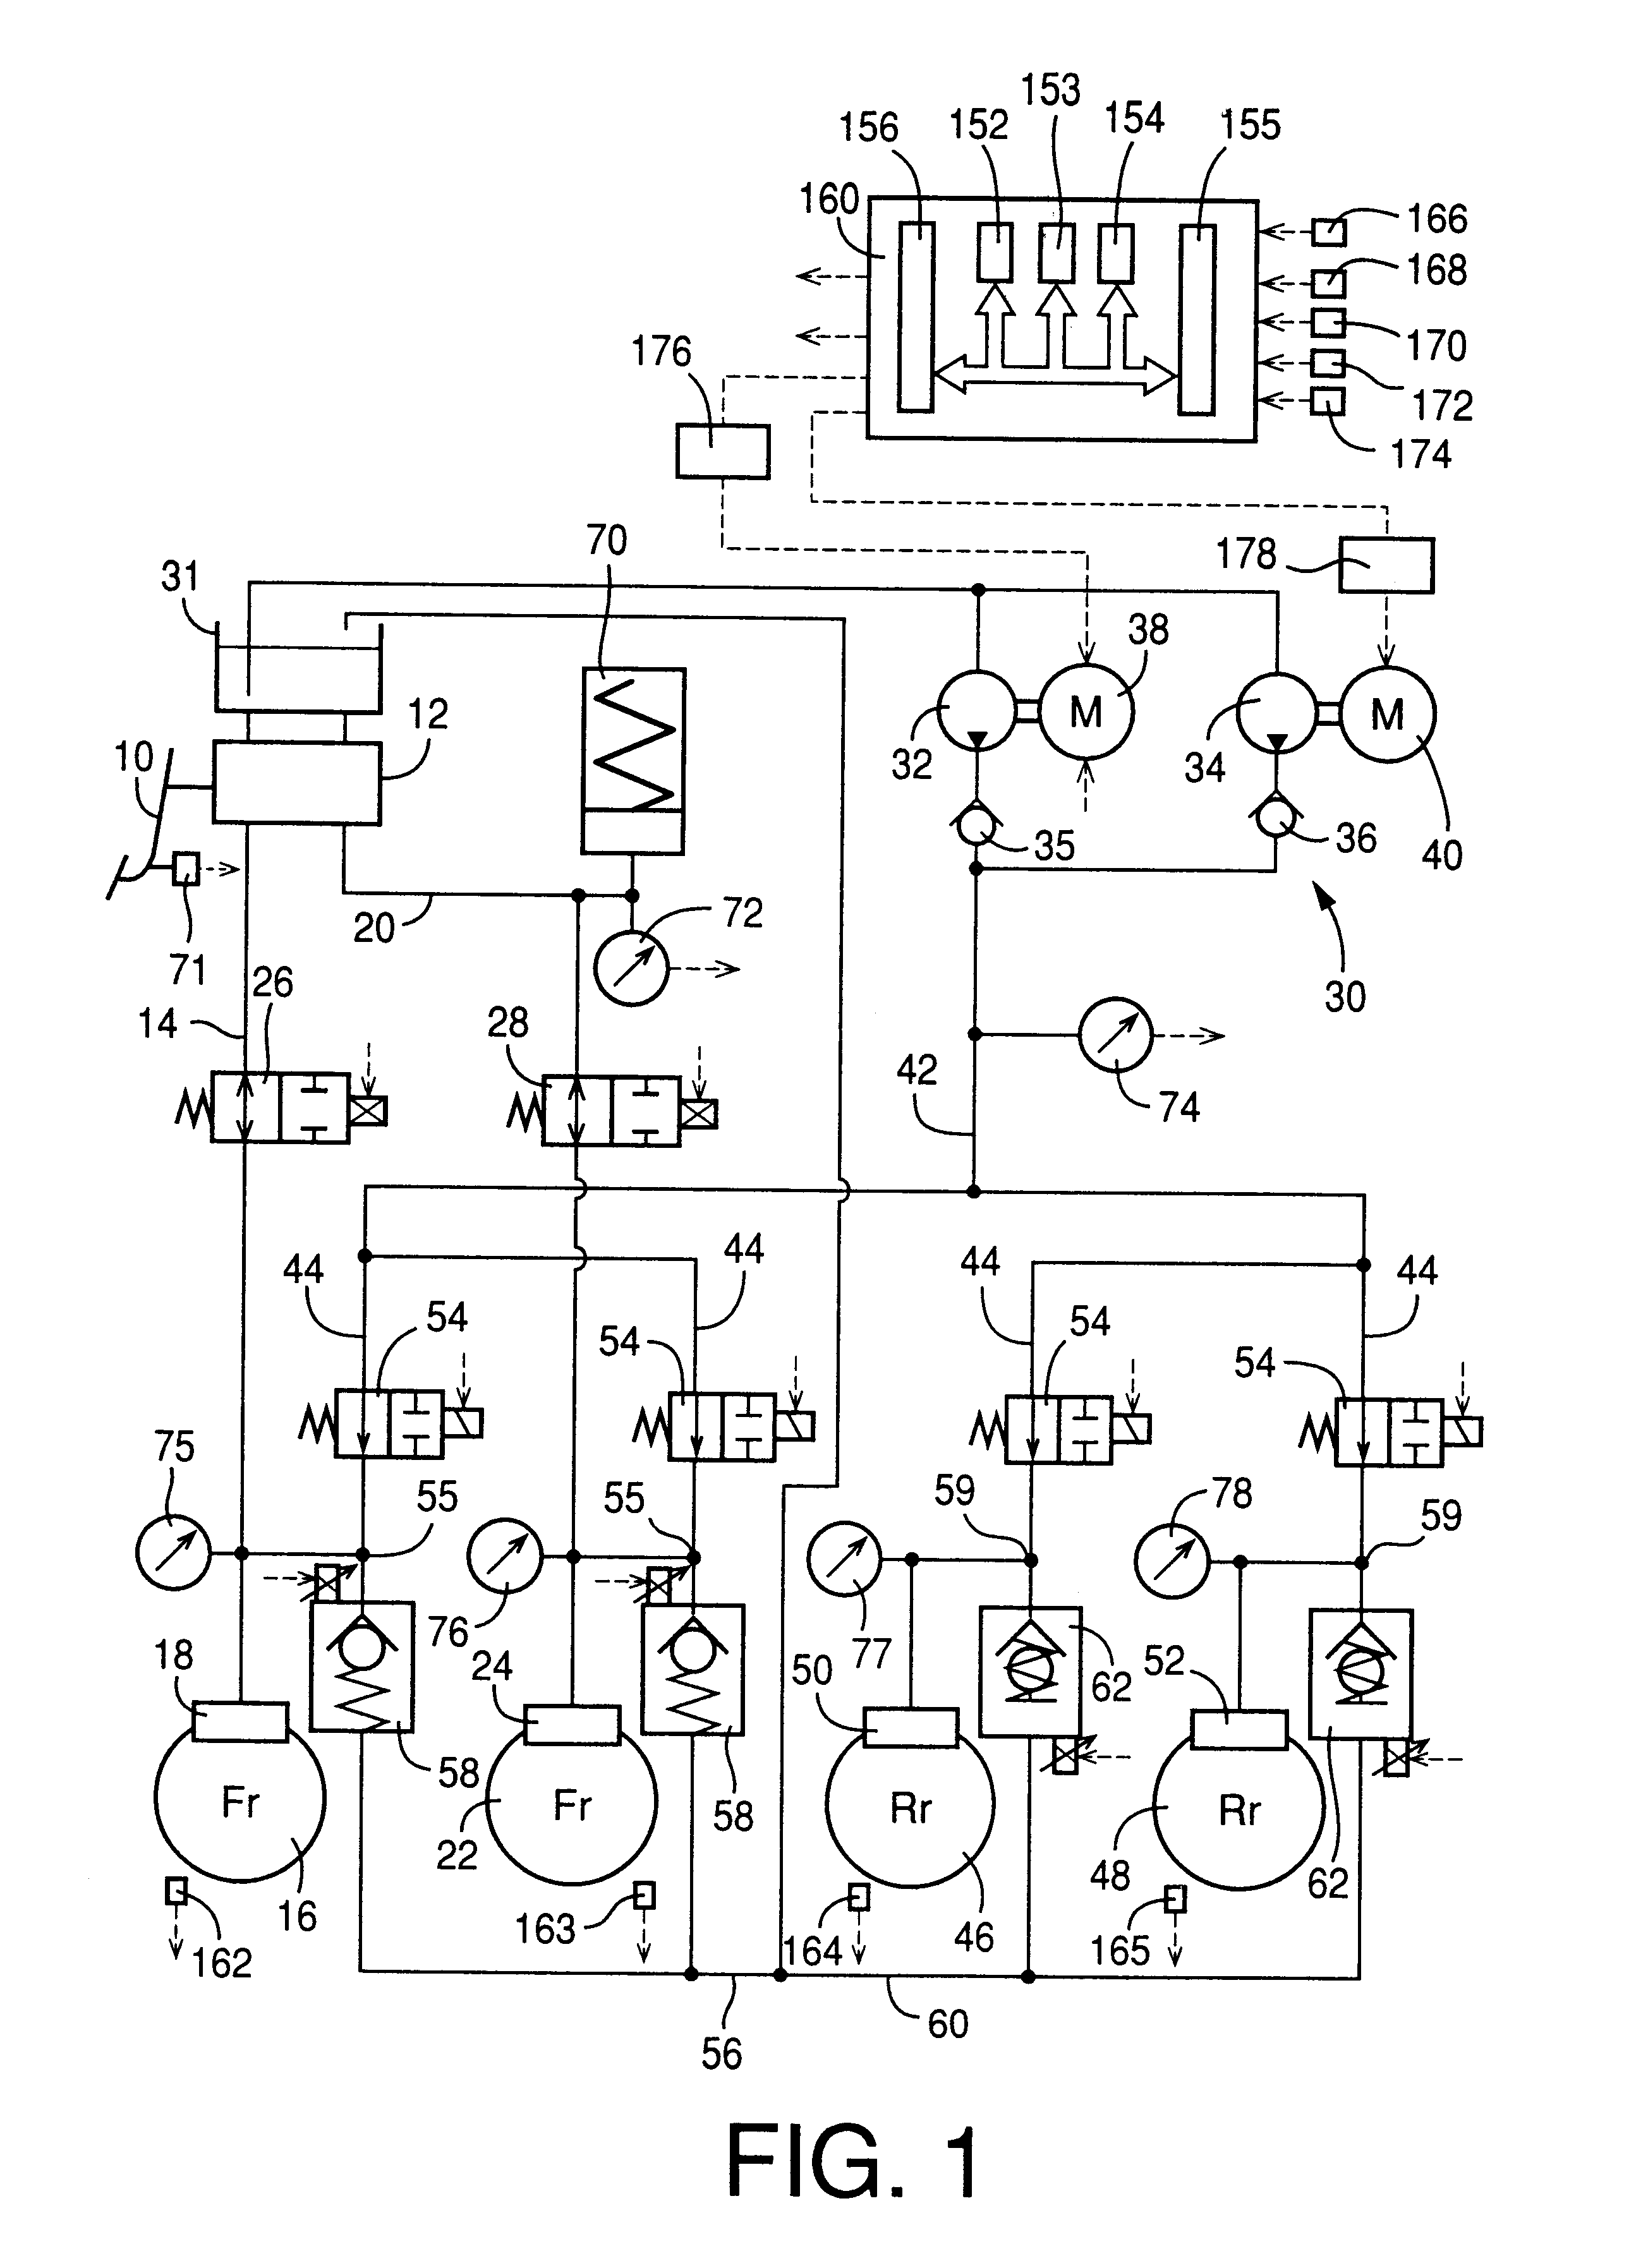 Apparatus for increasing brake cylinder pressure by controlling pump motor and reducing the pressure by controlling electric energy applied to control valve